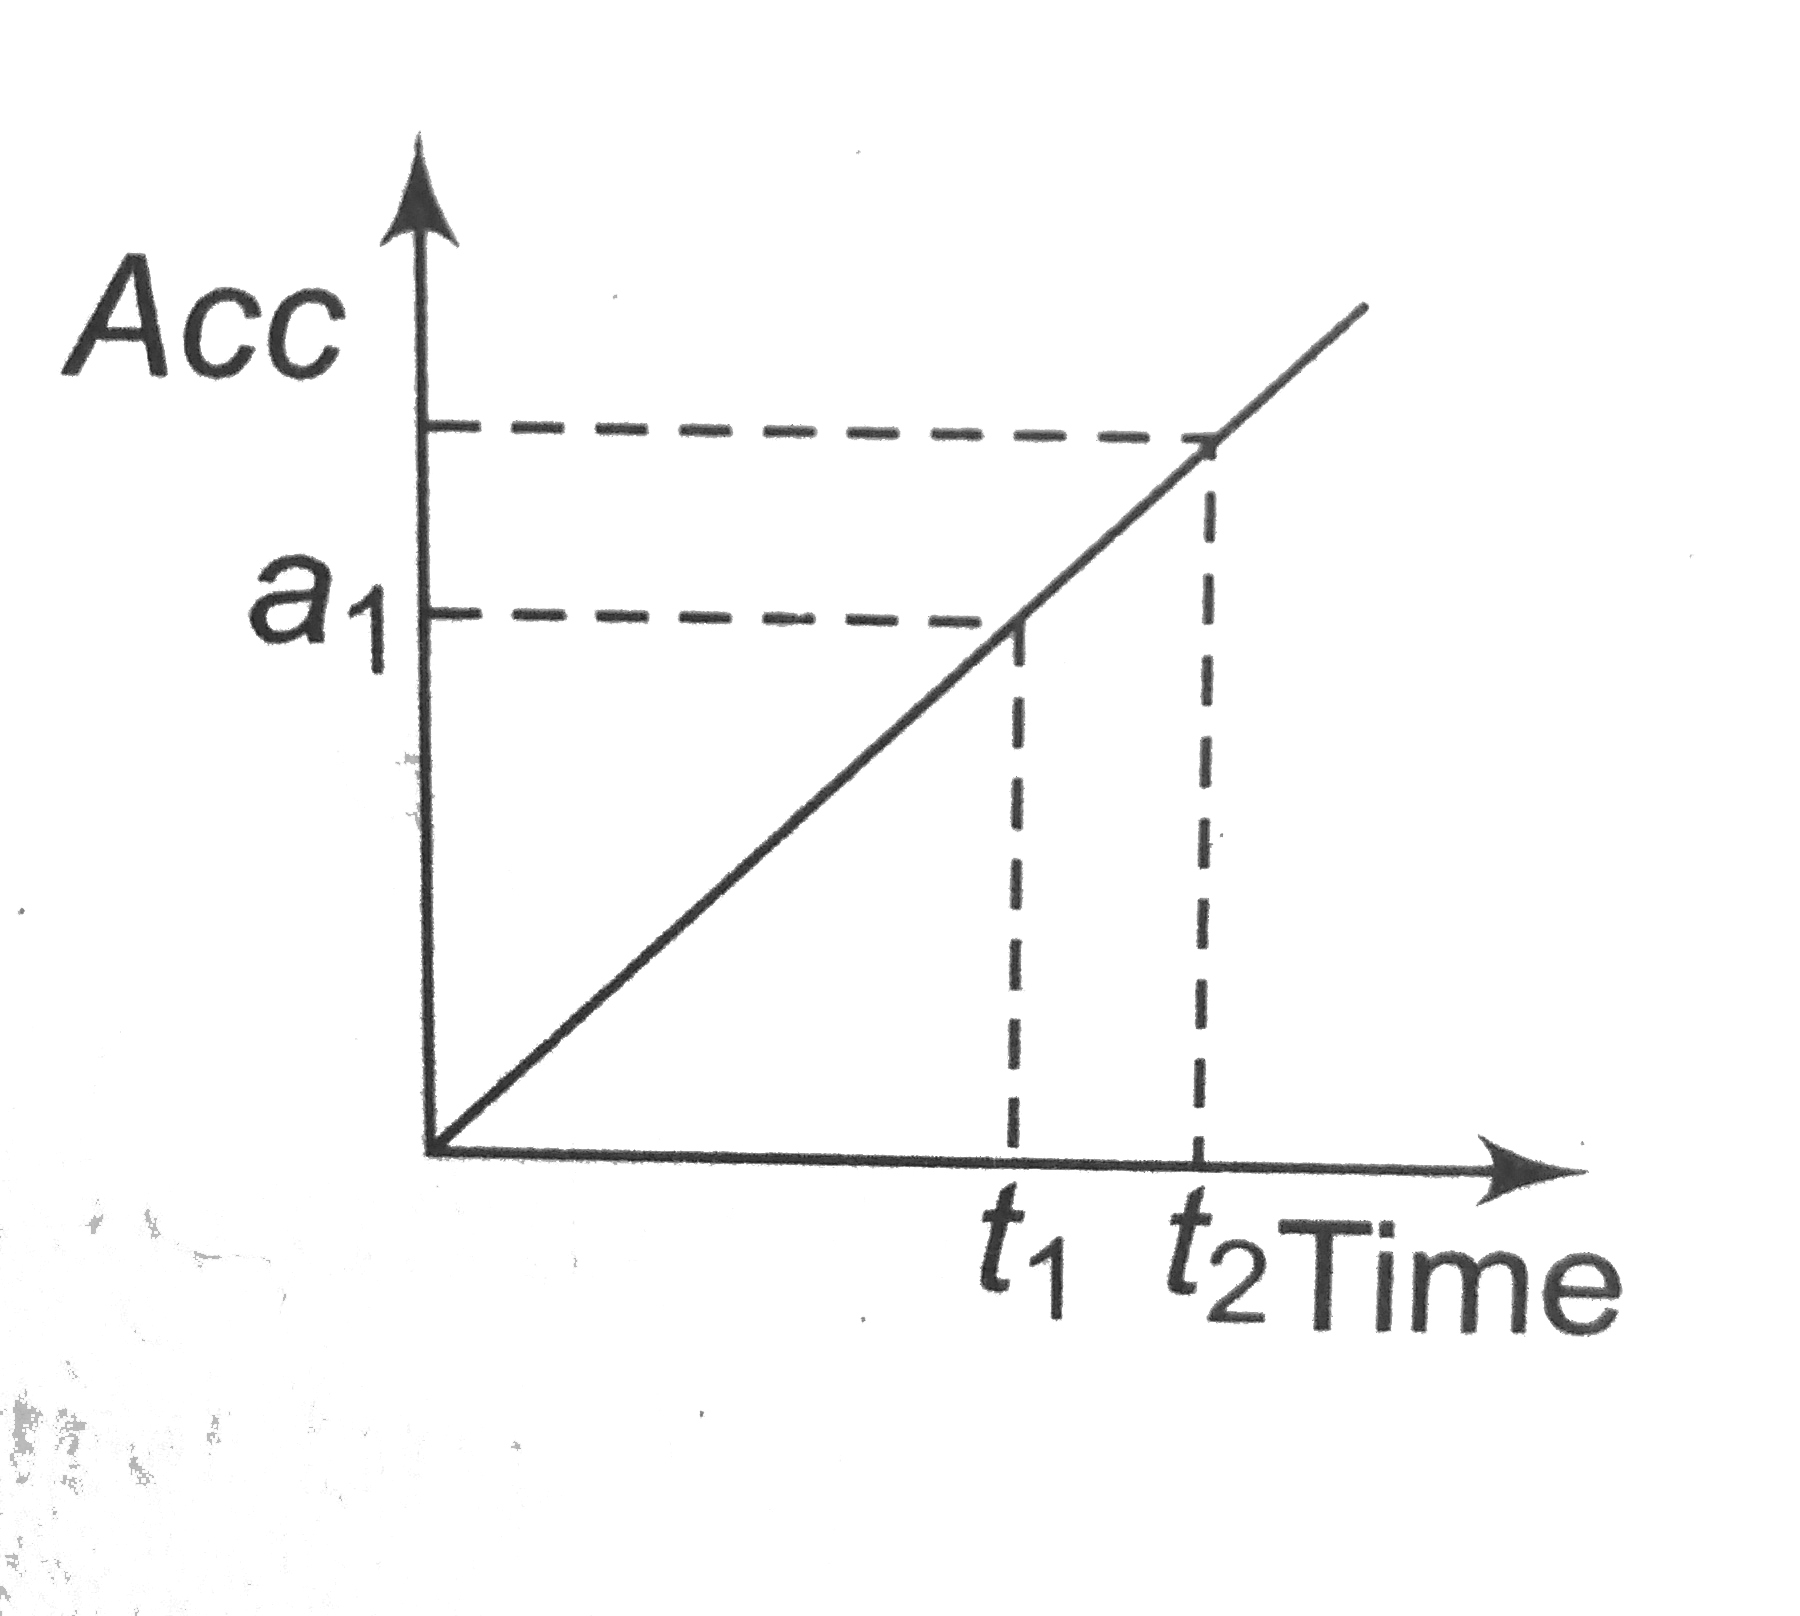 Acceleration time graph of a particle is shown work done by all the force acting on the particle of mass m in line internalt(1) and t(2) while a(1) is the acceleration at time t(1) given by t = 0 particle was at rest